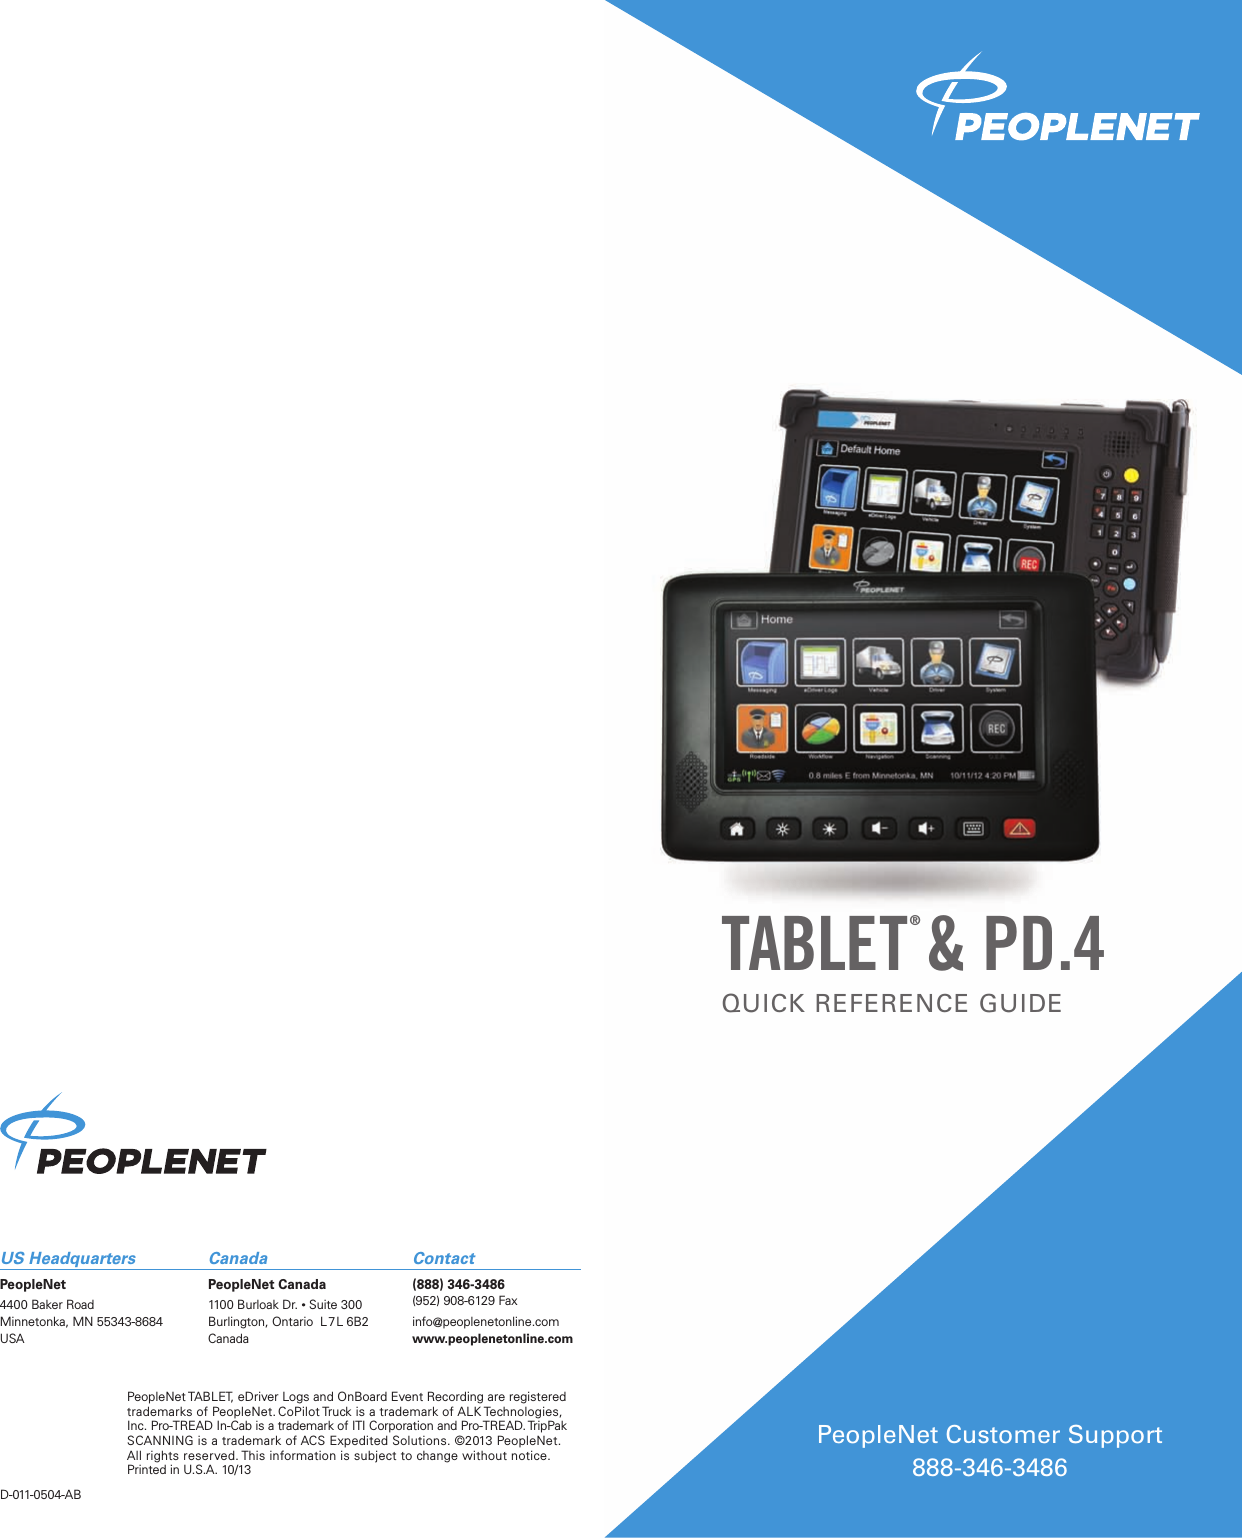 TABLET® &amp;  PD.4QUICK REFERENCE GUIDEPeopleNet Customer Support  888-346-3486US Headquarters  Canada  ContactPeopleNet  PeopleNet Canada  (888) 346-34864400 Baker Road  1100 Burloak Dr. • Suite 300  (952) 908-6129 FaxMinnetonka, MN 55343-8684  Burlington, Ontario  L 7L 6B2  info@peoplenetonline.comUSA Canada www.peoplenetonline.comPeopleNet TABLET, eDriver Logs and OnBoard Event Recording are registered trademarks of PeopleNet. CoPilot Truck is a trademark of ALK Technologies, Inc. Pro-TREAD In-Cab is a trademark of ITI Corporation and Pro-TREAD. TripPak SCANNING is a trademark of ACS Expedited Solutions. ©2013 PeopleNet.  All rights reserved. This information is subject to change without notice.  Printed in U.S.A. 10/13D-011-0504-AB